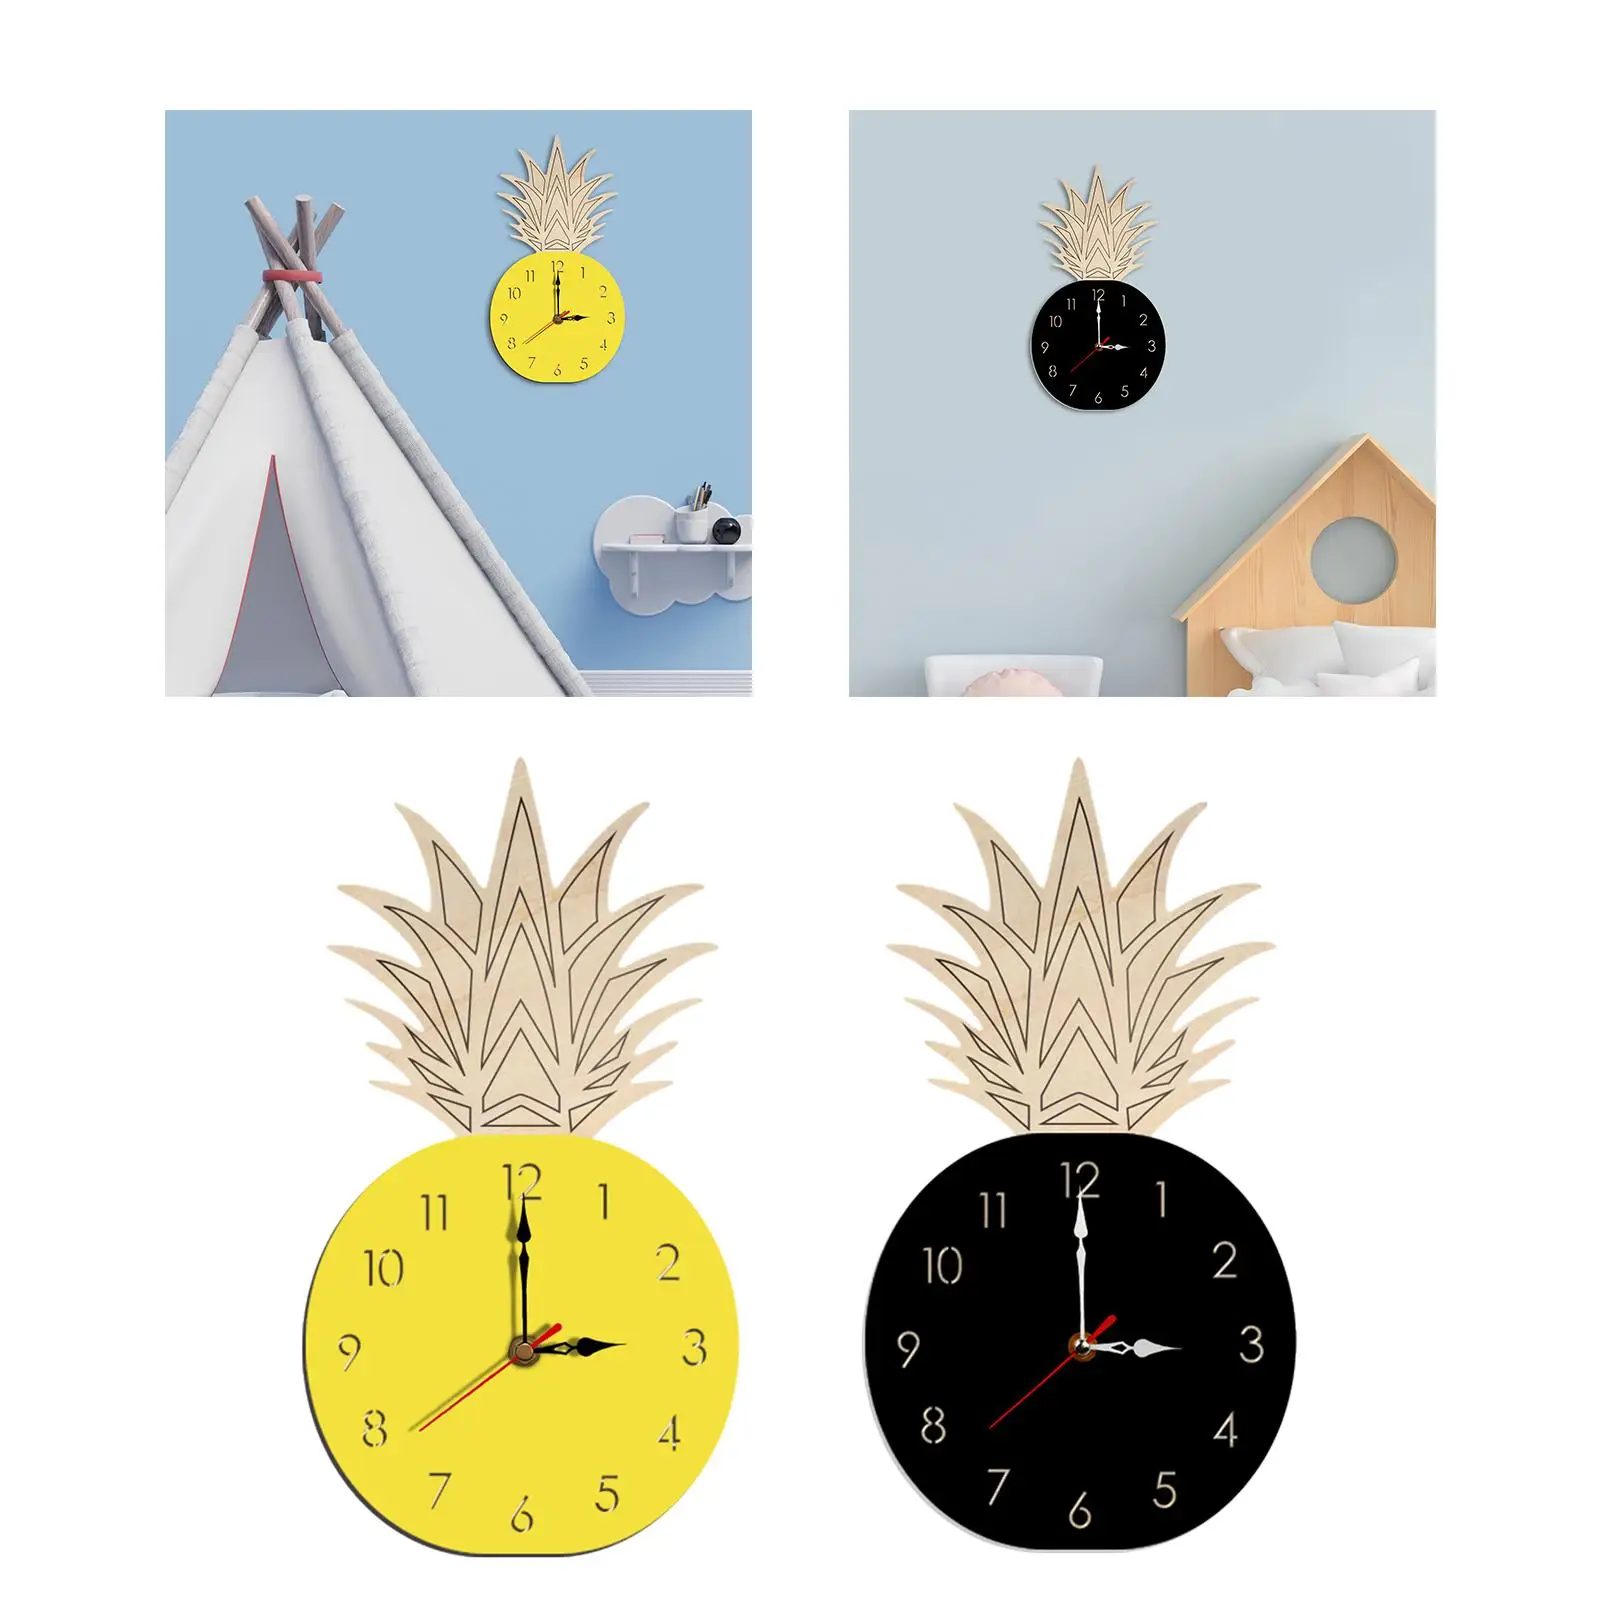 Pineapple Fruit Wall Clock Silent Cartoon for Office Kitchen Home Decoration